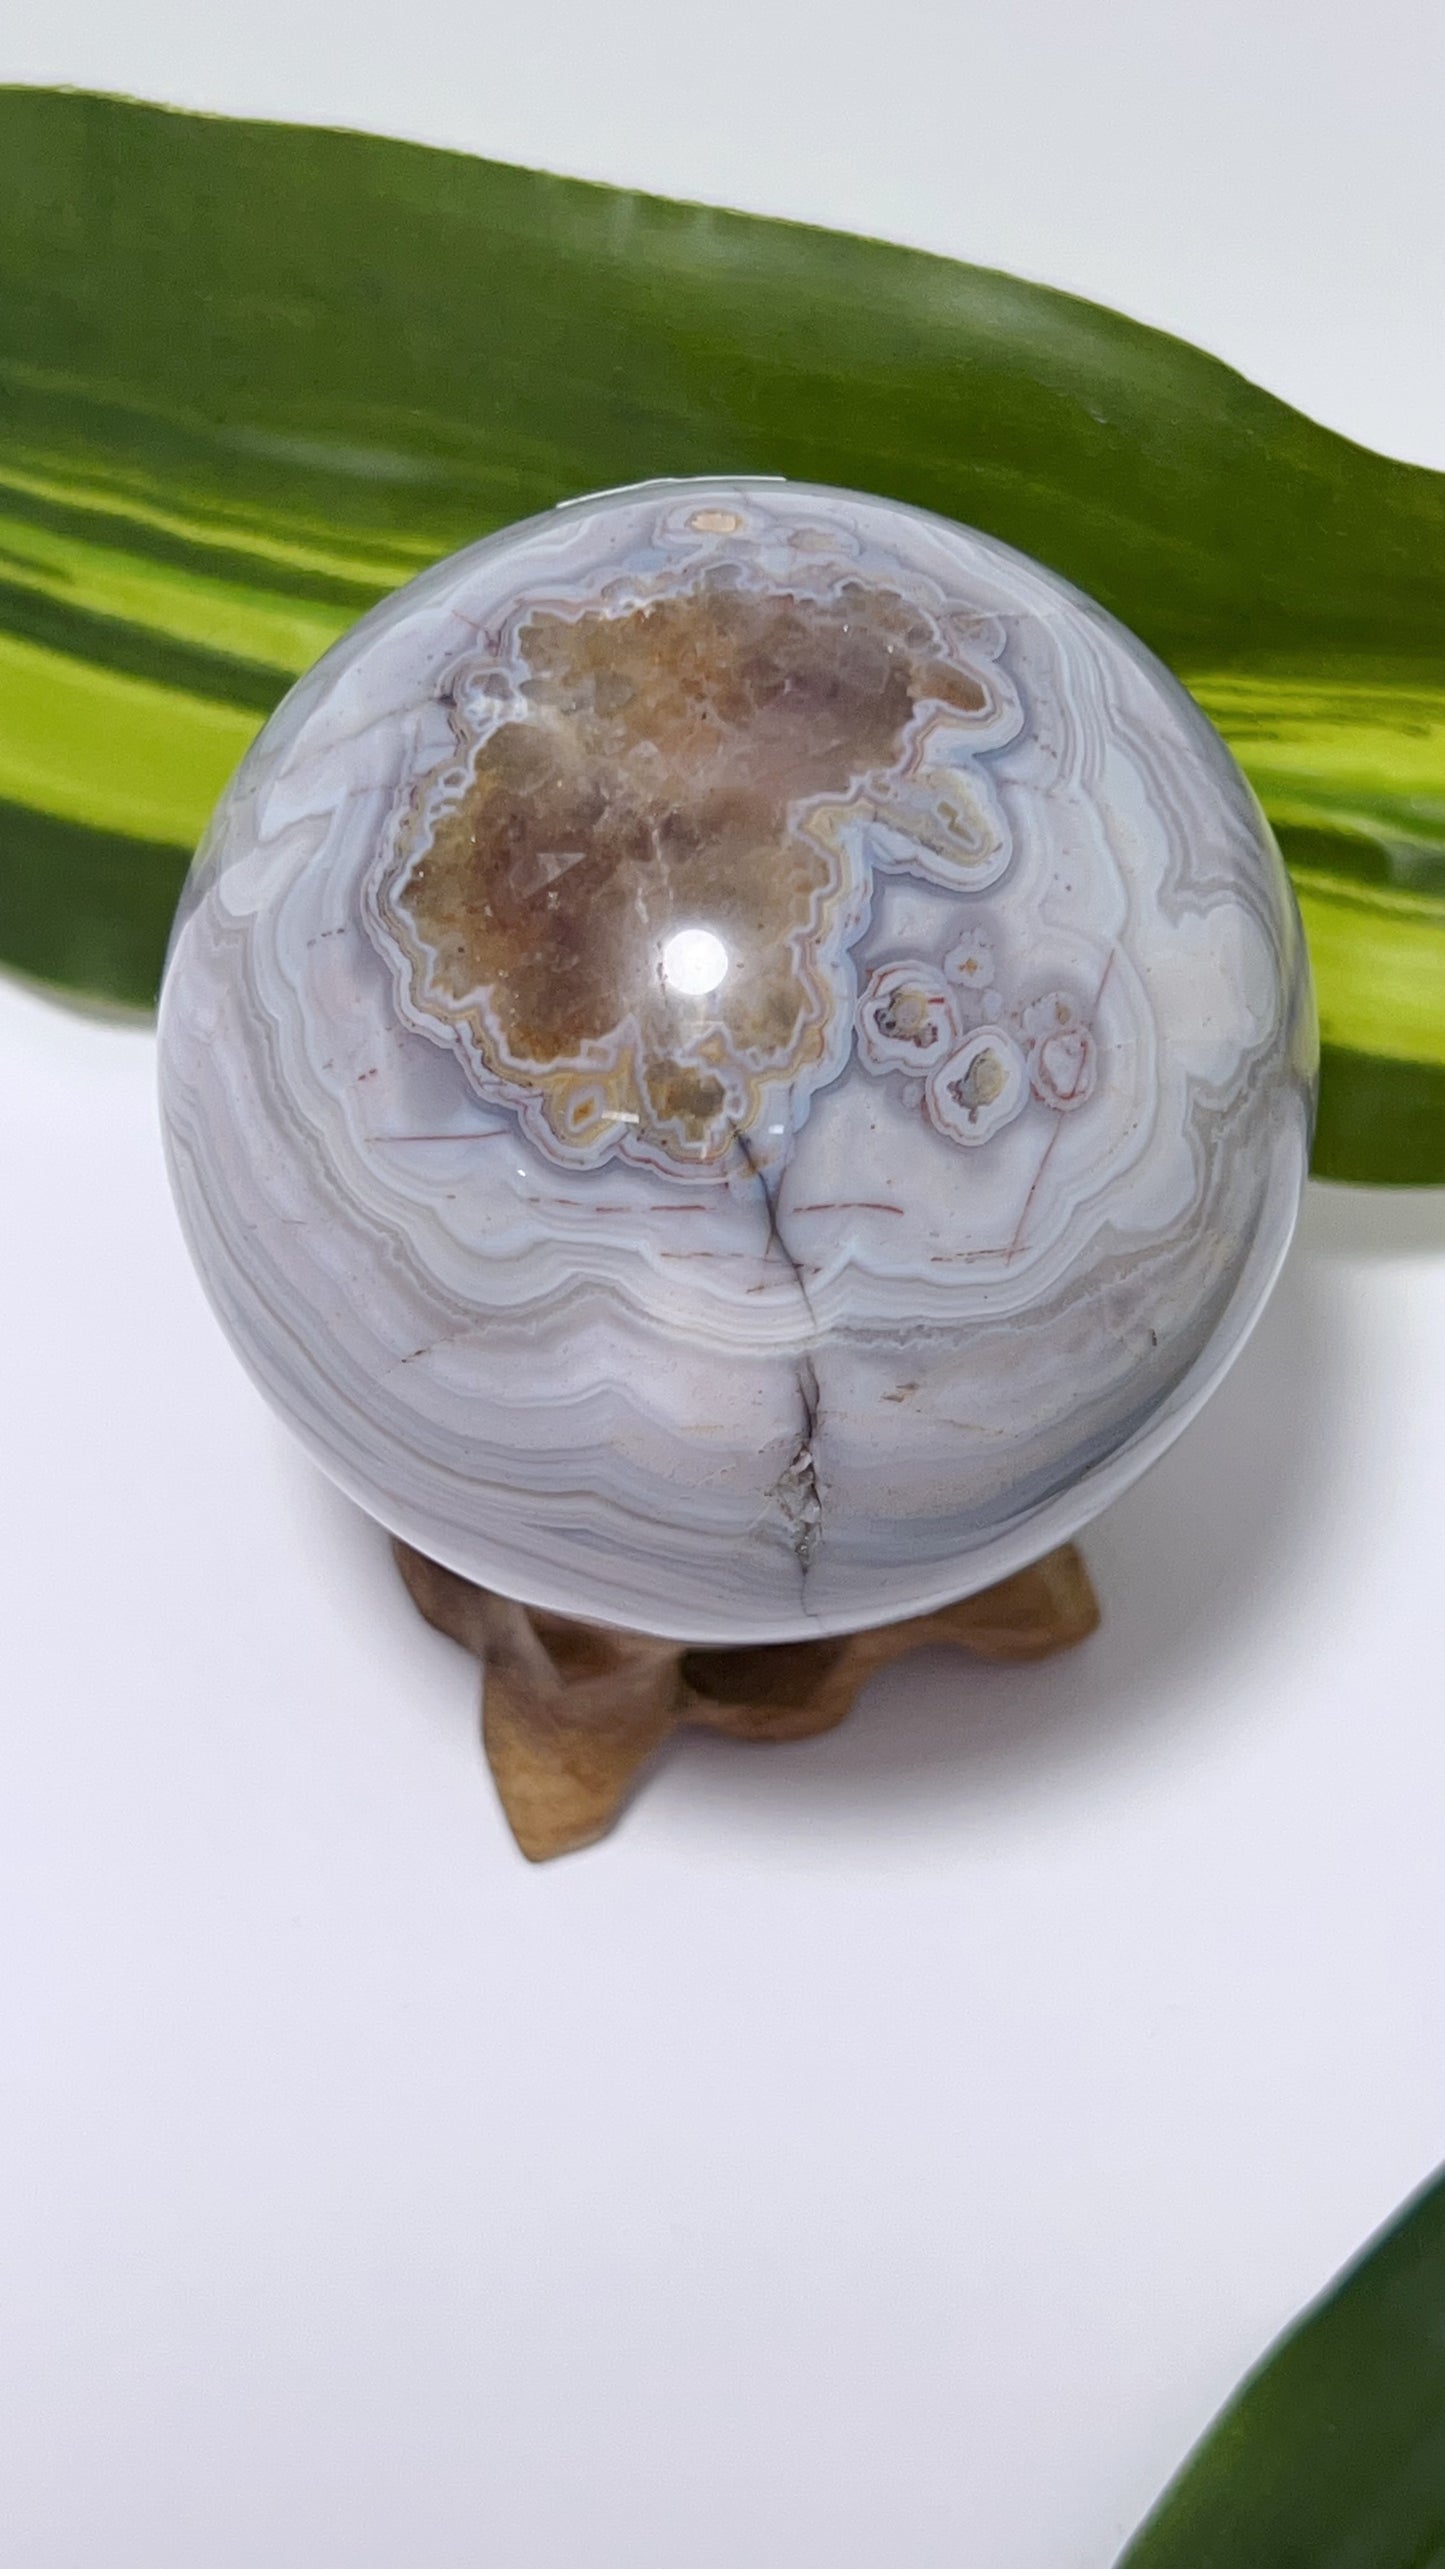 Amethyst and Mexican Agate Sphere 328g